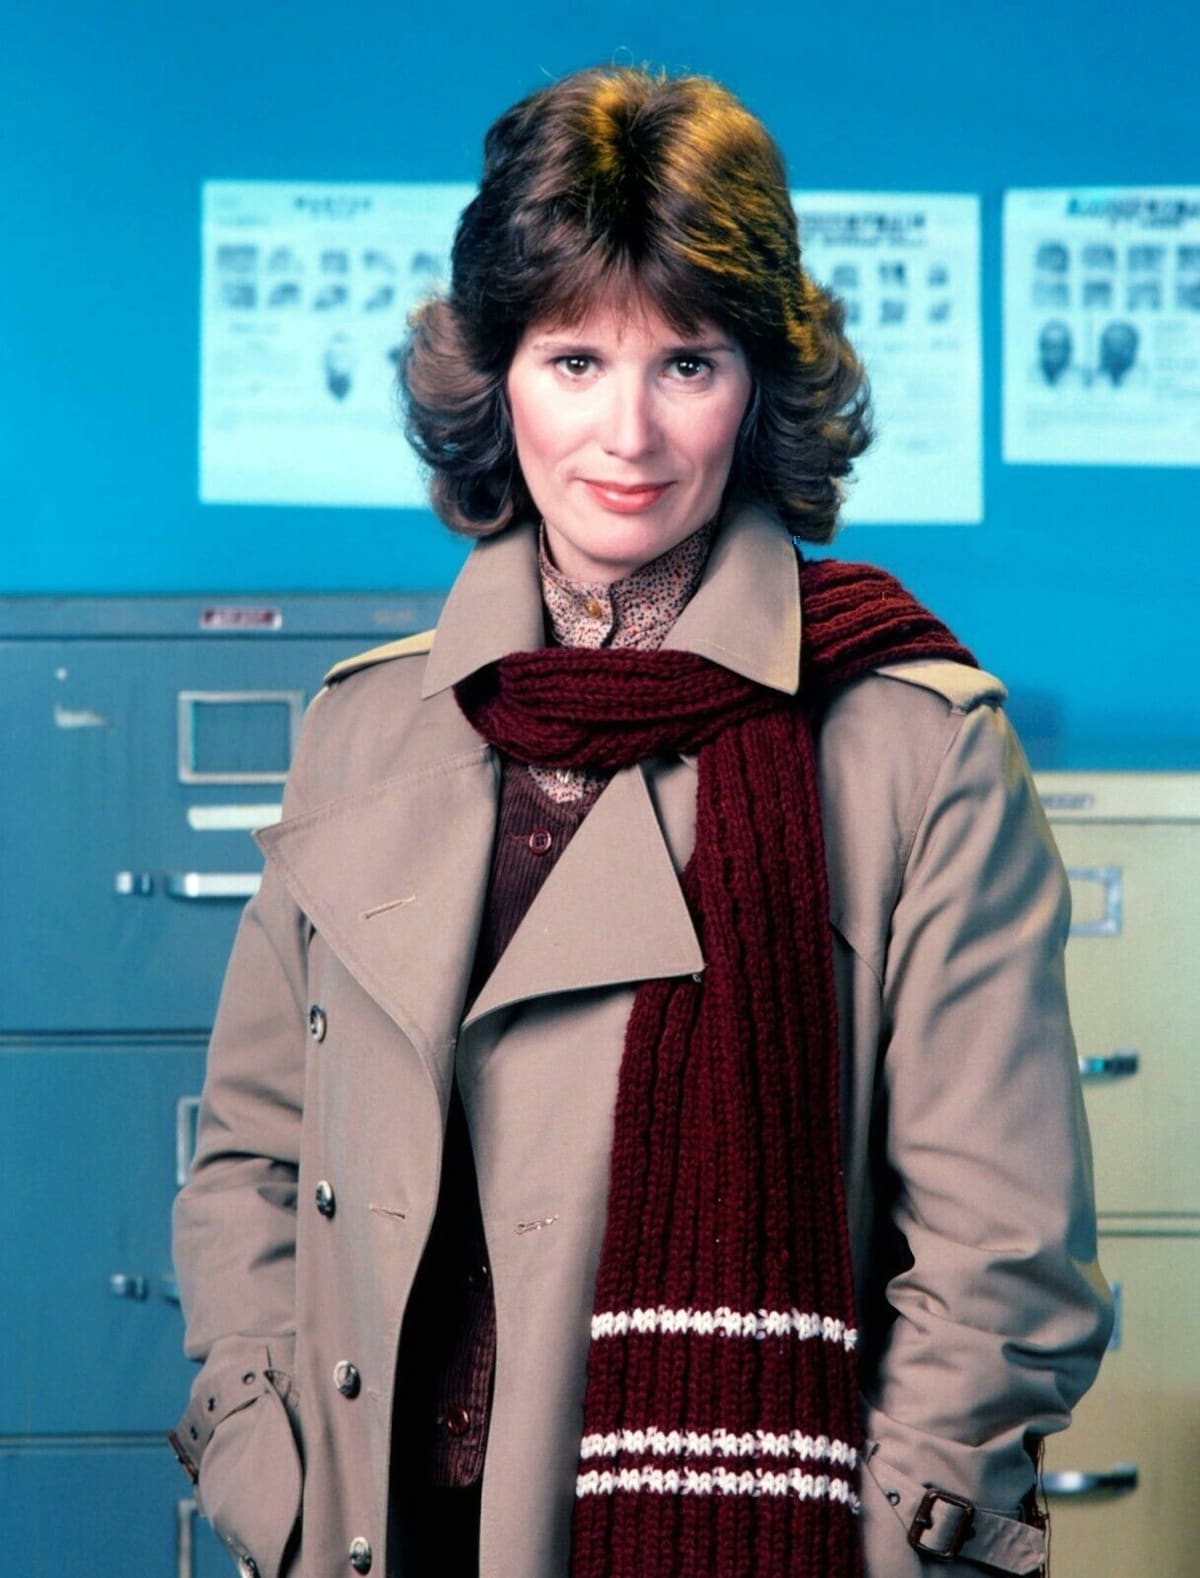 Barbara Bosson is best known for her portrayal of the vulnerable Fay Furillo on the 1980s NBC television series Hill Street Blues during the show's first six seasons